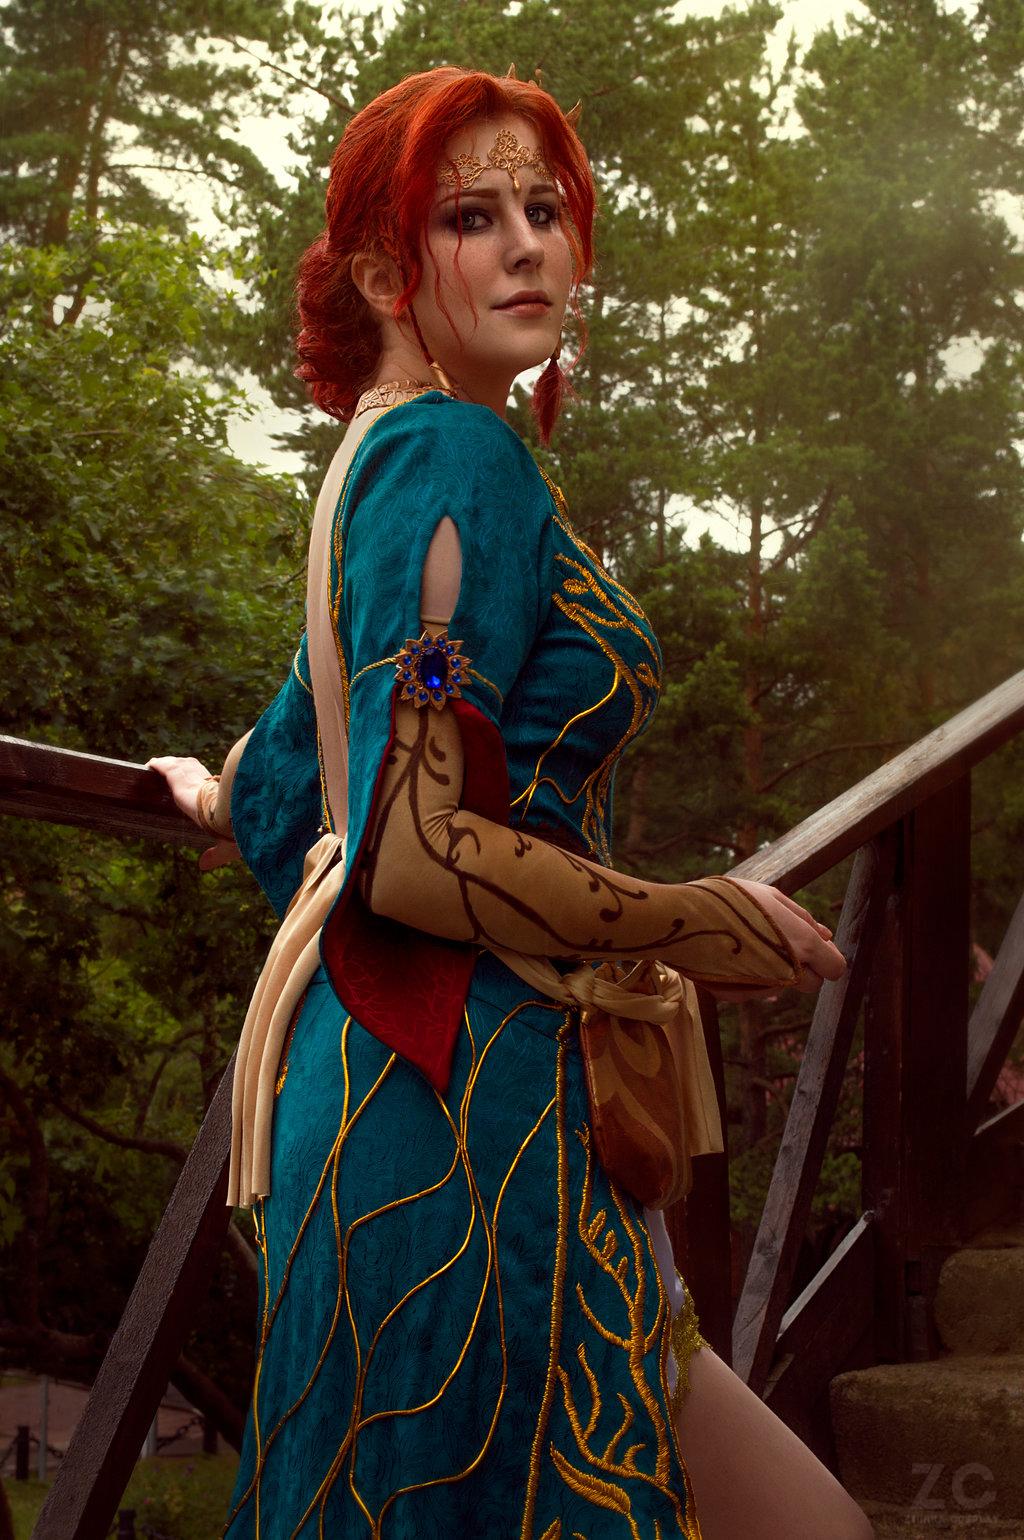 60+ Hot Pictures Of Triss Merigold From The Witcher Series Are Delight For Fans 82